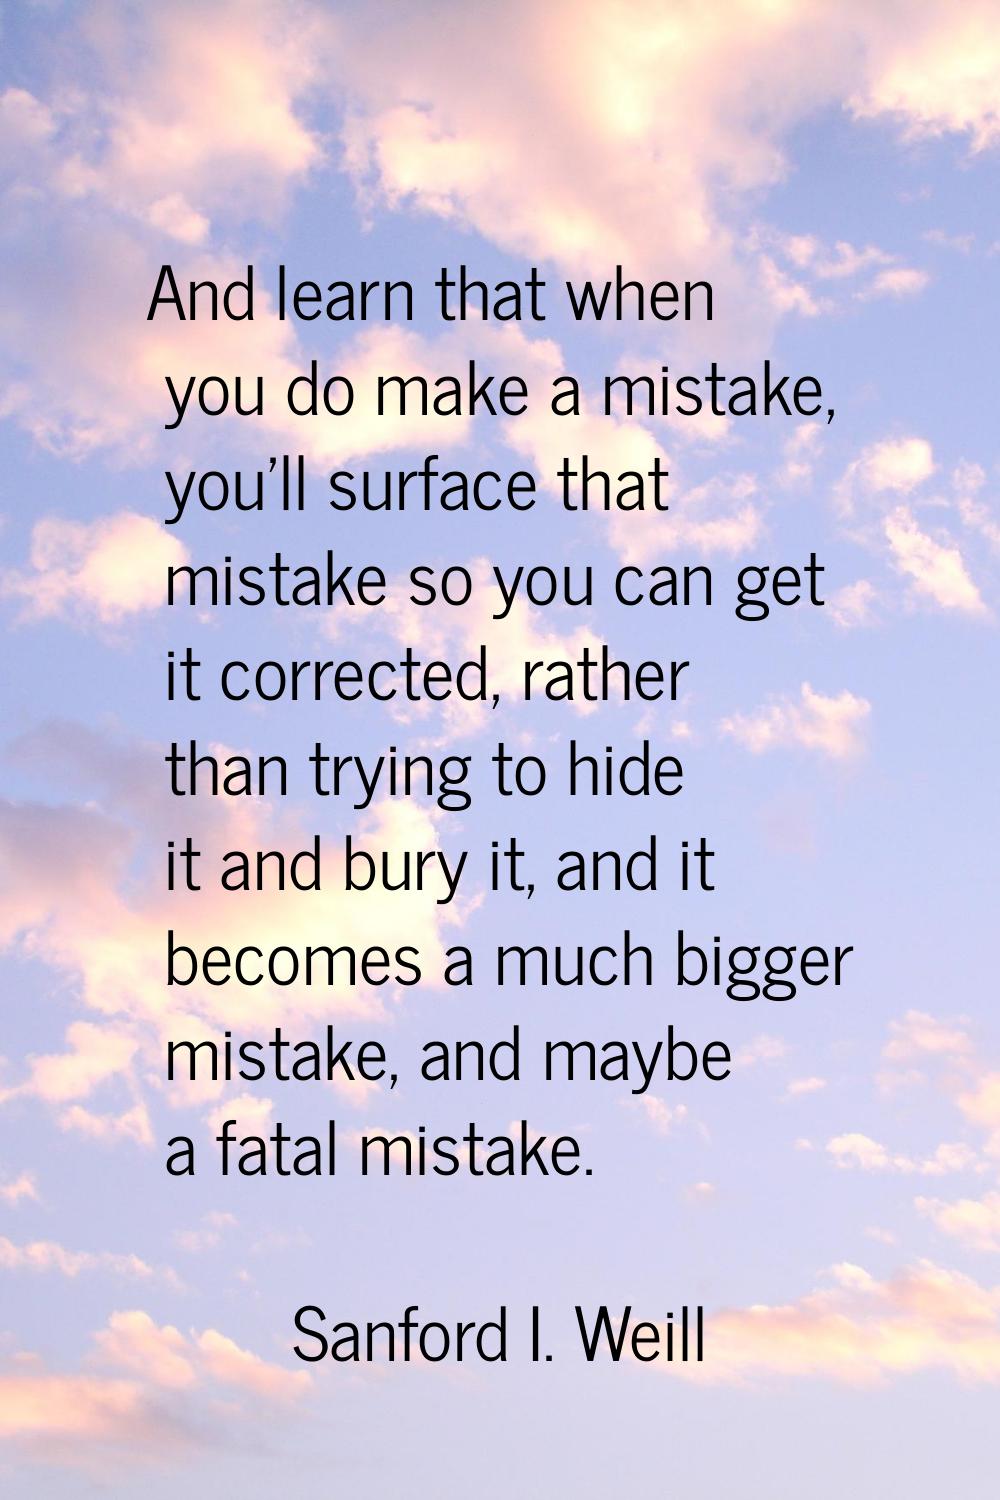 And learn that when you do make a mistake, you'll surface that mistake so you can get it corrected,